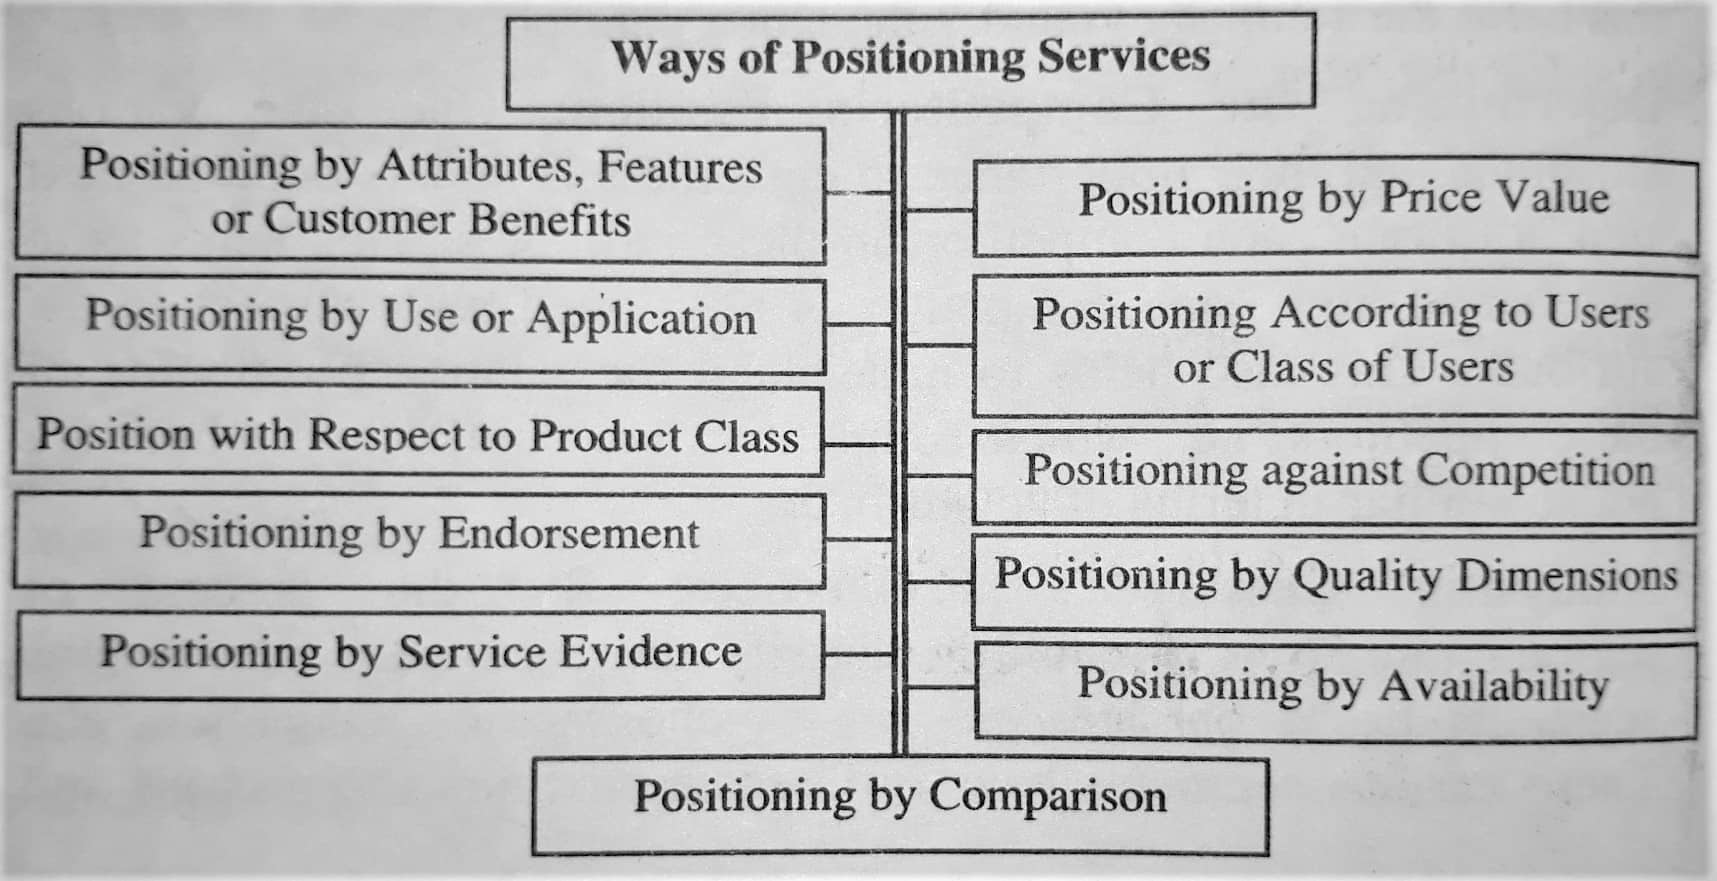 Ways of Positioning Services